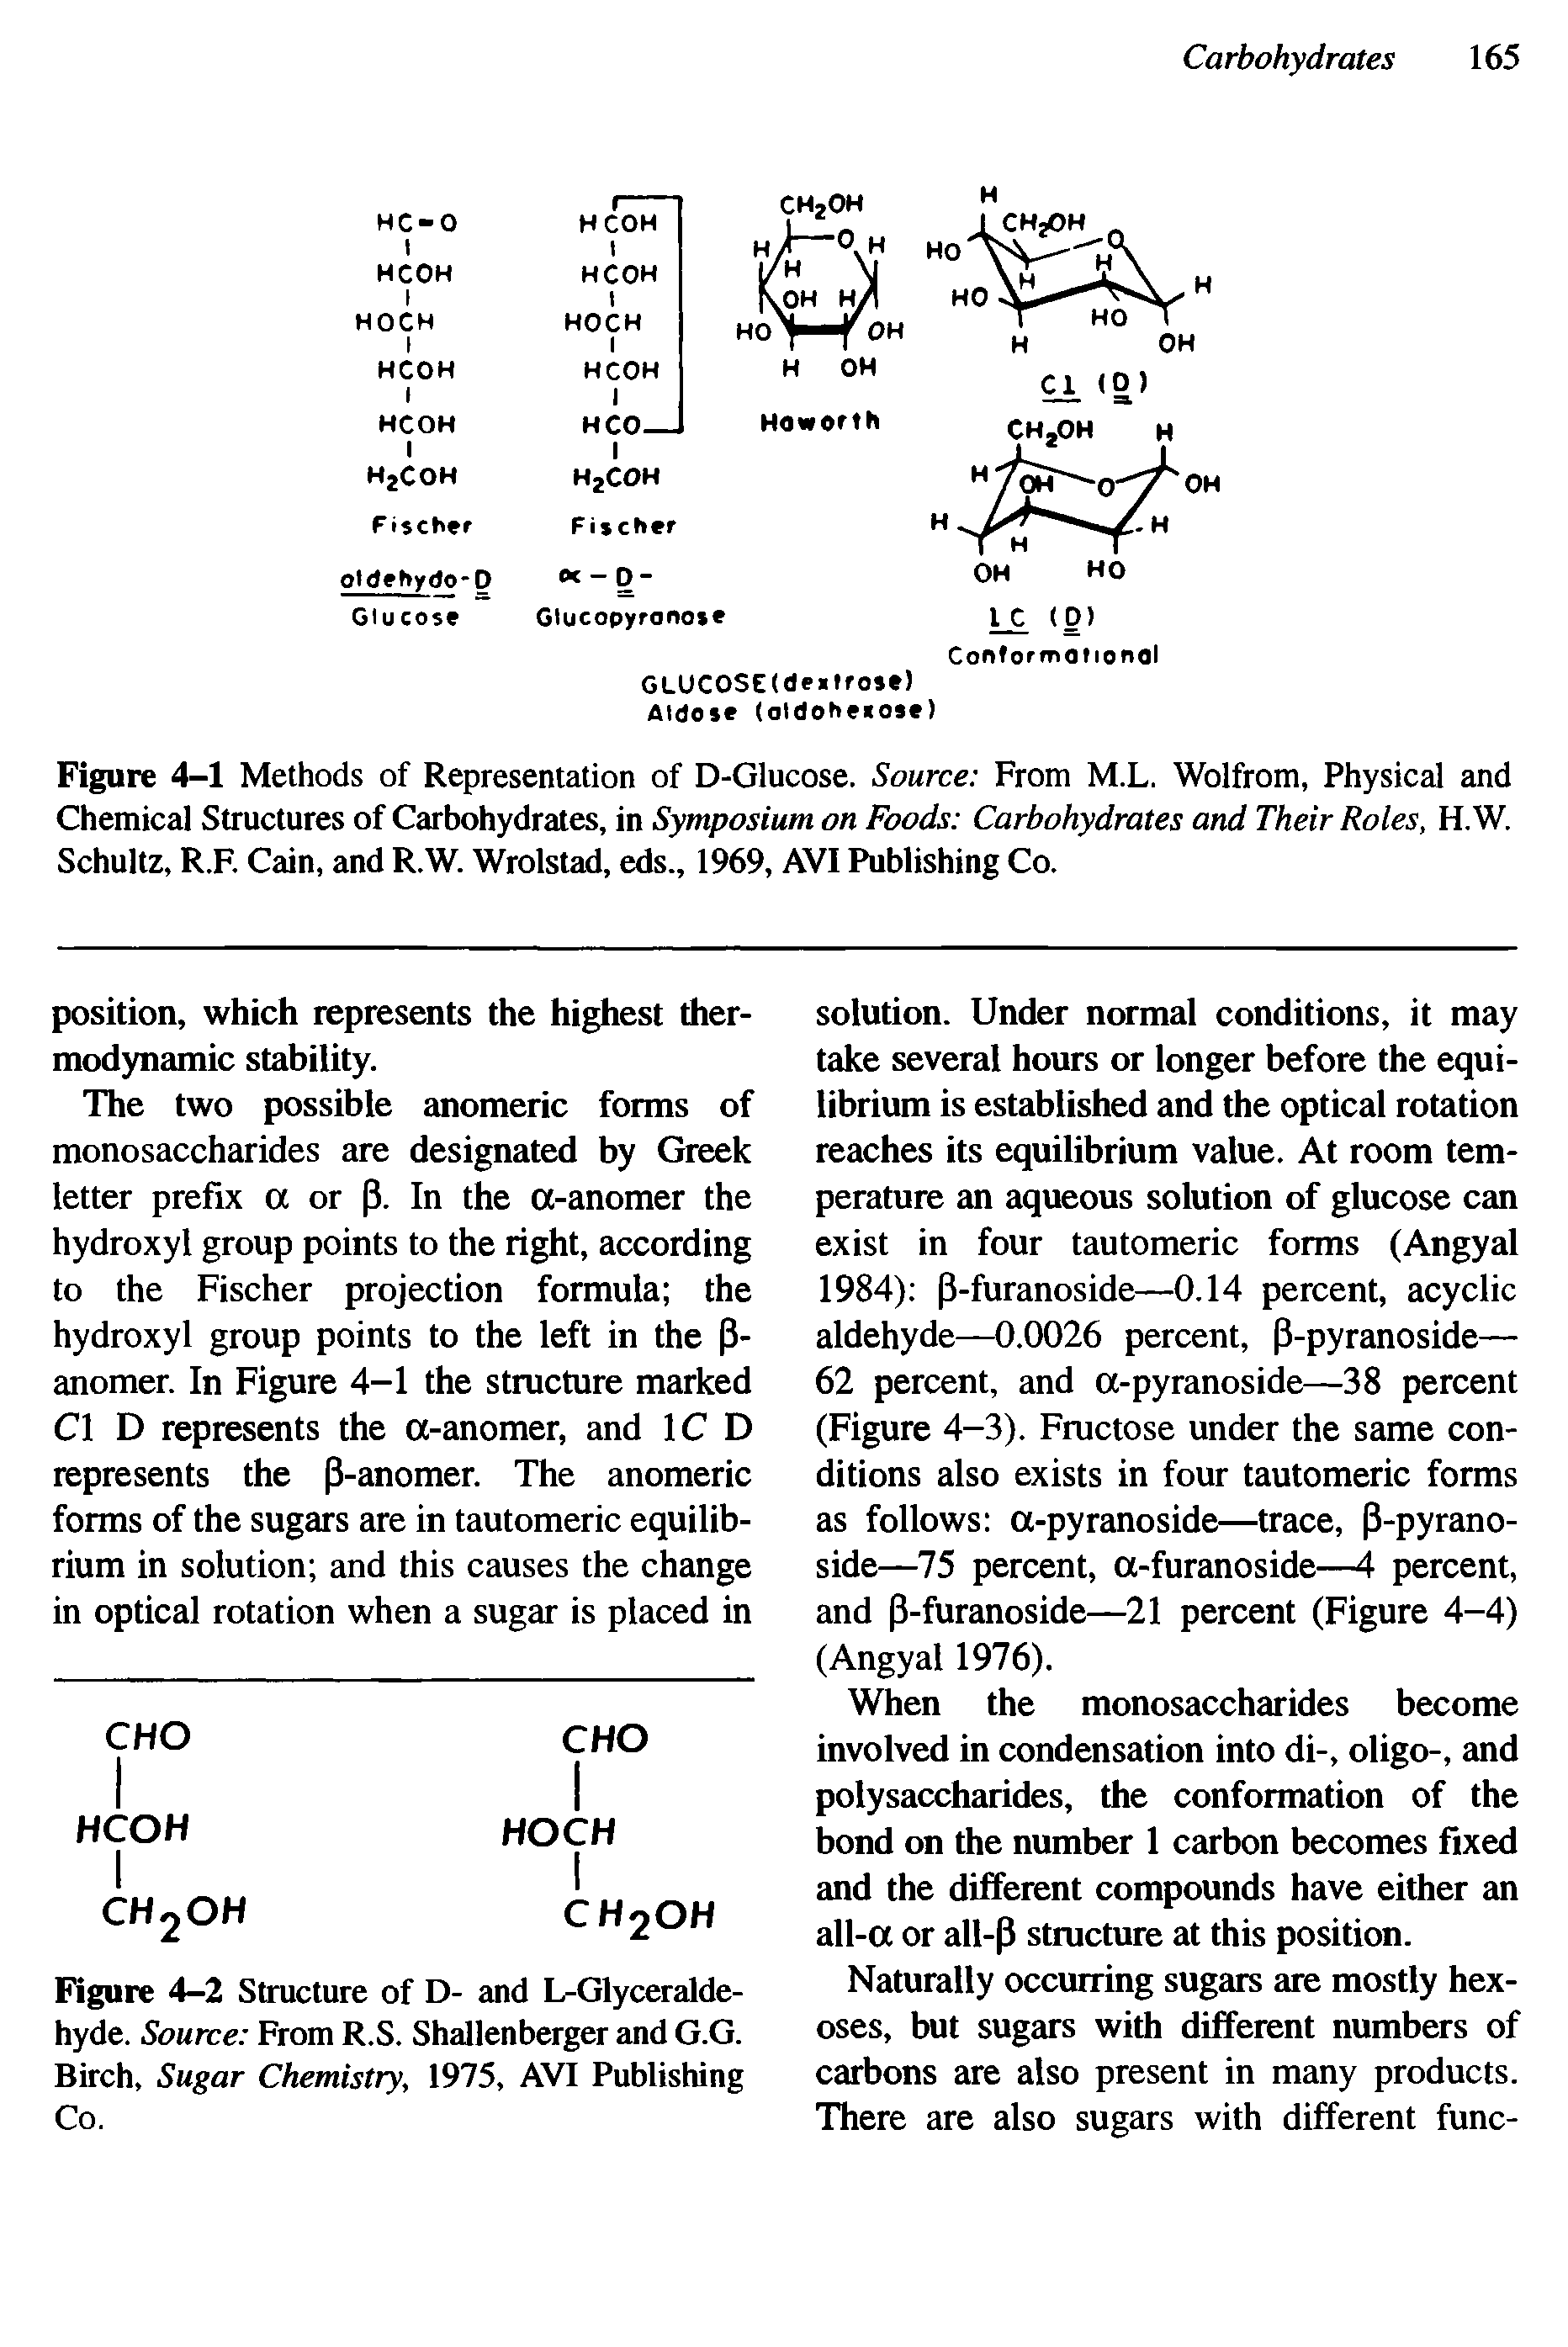 Figure 4-1 Methods of Representation of D-Glucose. Source From M.L. Wolfrom, Physical and Chemical Structures of Carbohydrates, in Symposium on Foods Carbohydrates and Their Roles, H. W. Schultz, R.F. Cain, and R.W. Wrolstad, eds., 1969, AVI Publishing Co.